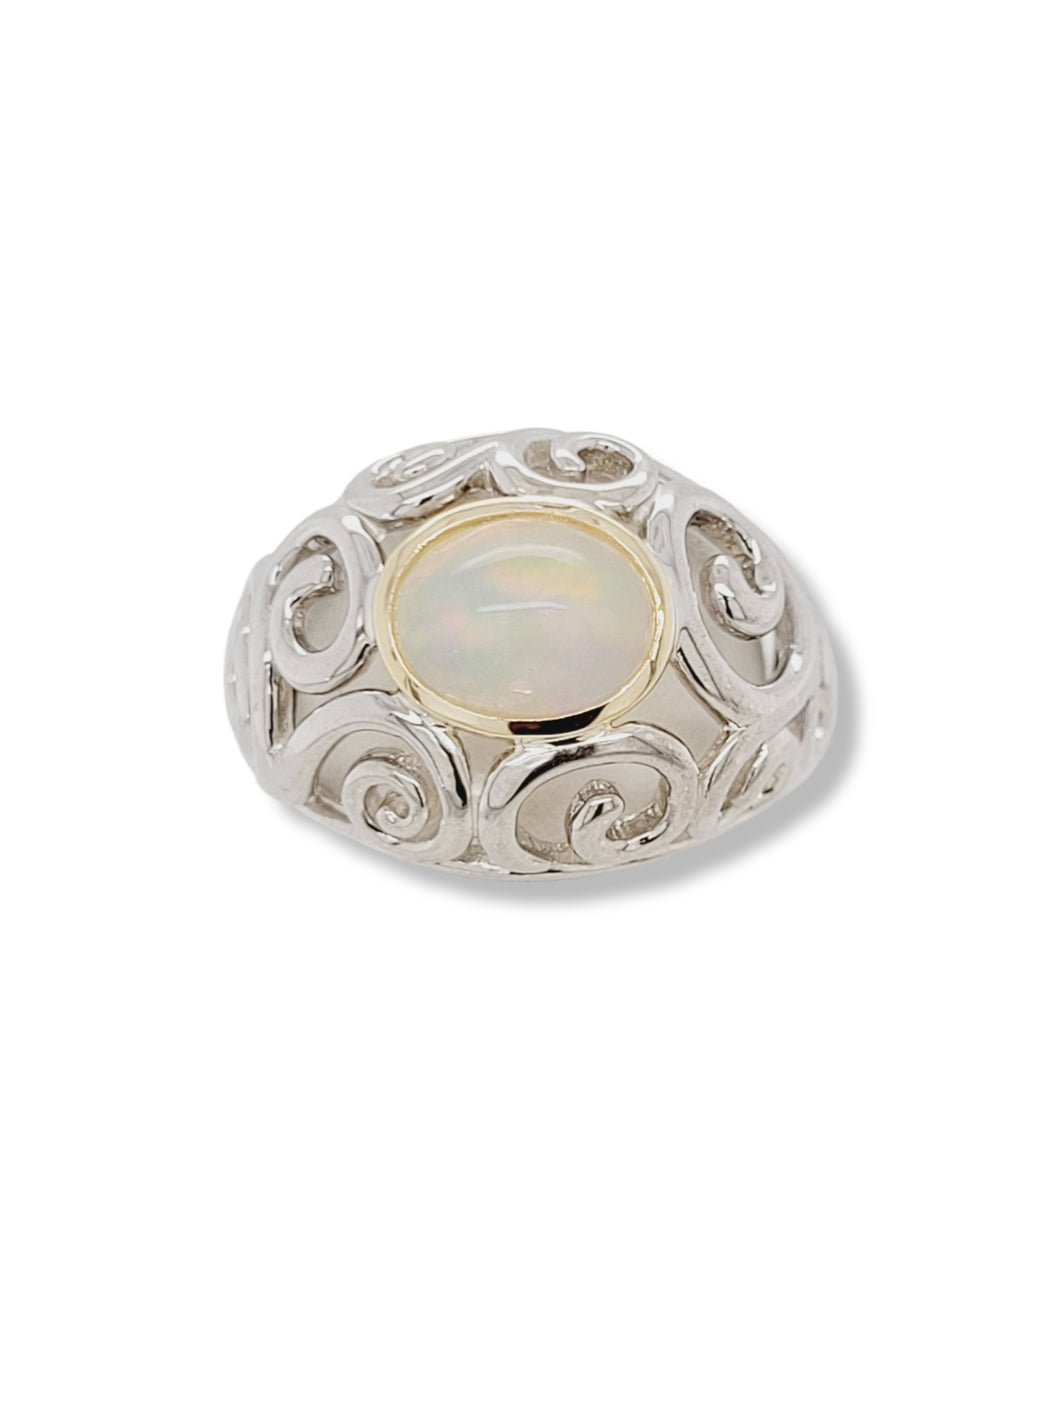 Opal Scroll Sterling Silver and 14k Ring